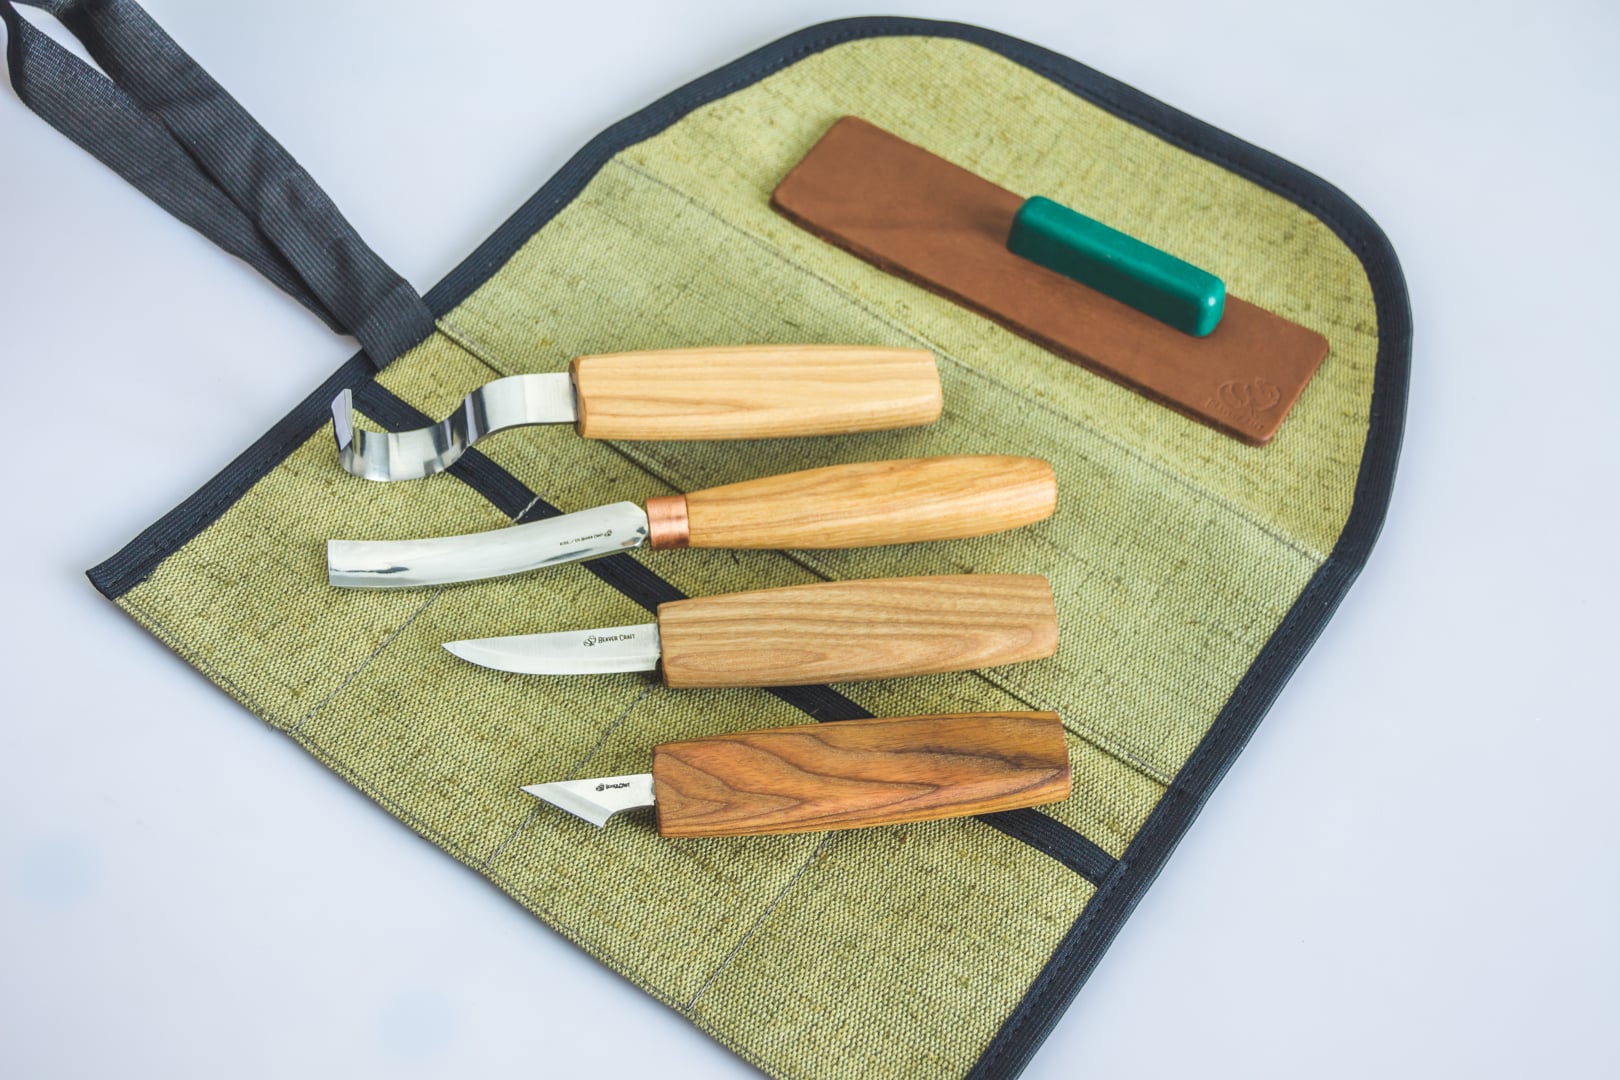 S49 - Wood Carving Tool Set for Spoon Carving with compact chisel